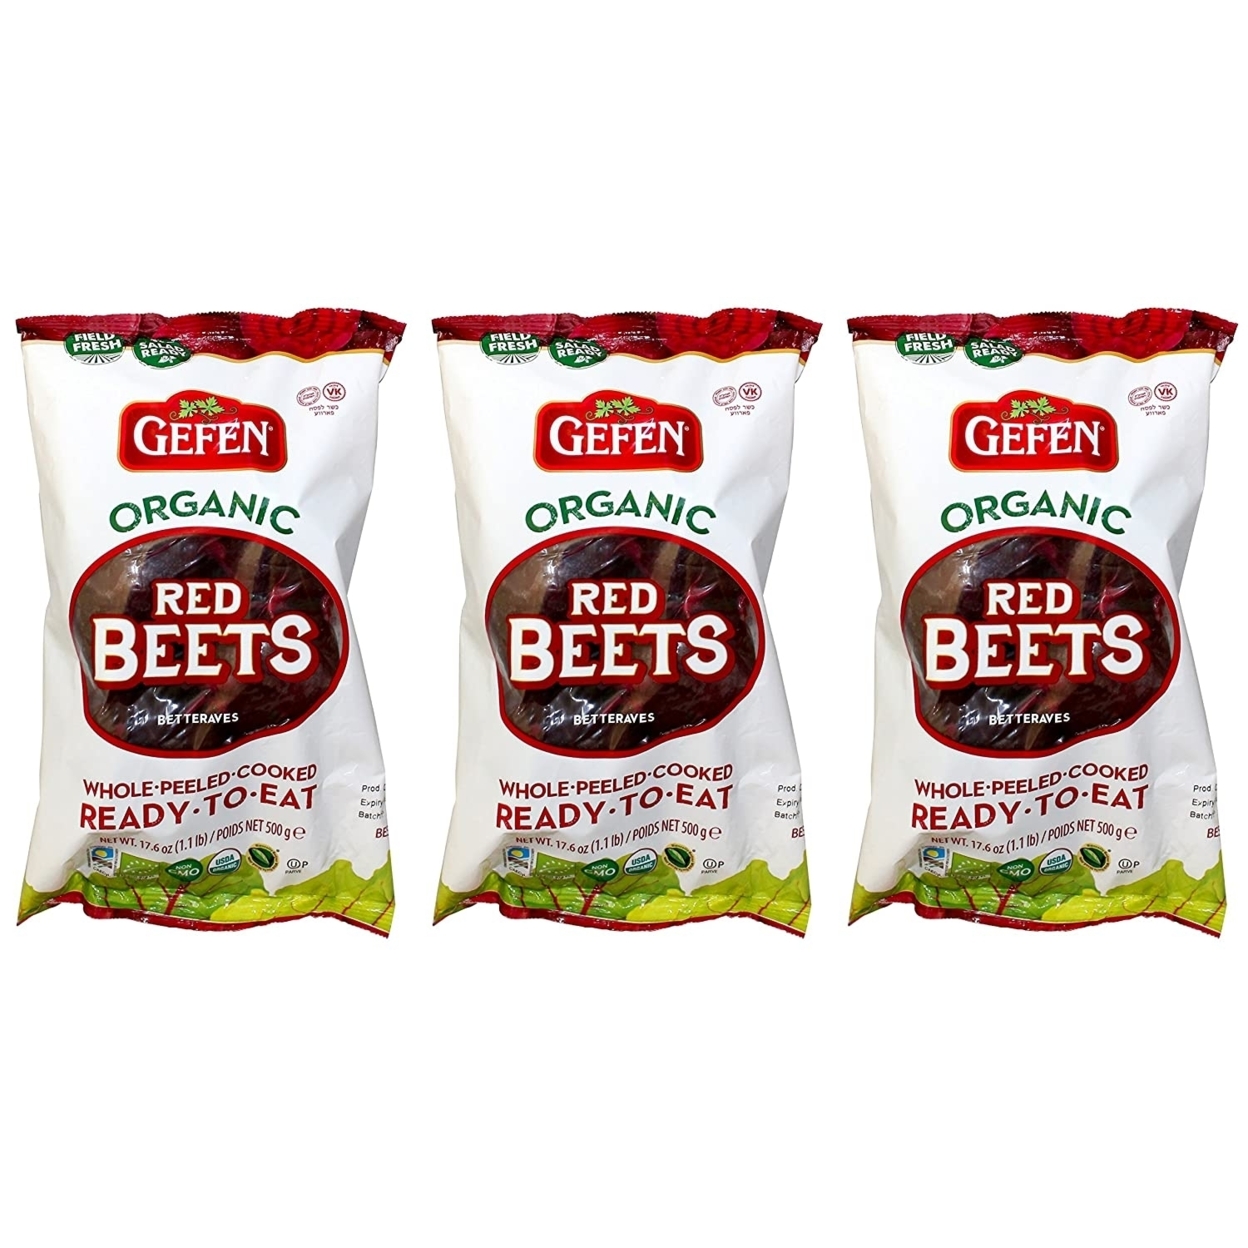 Gefen Organic Red Beets, Whole, Peeled, Cooked & Ready To Eat, 1.1 Lb (3 Pack)